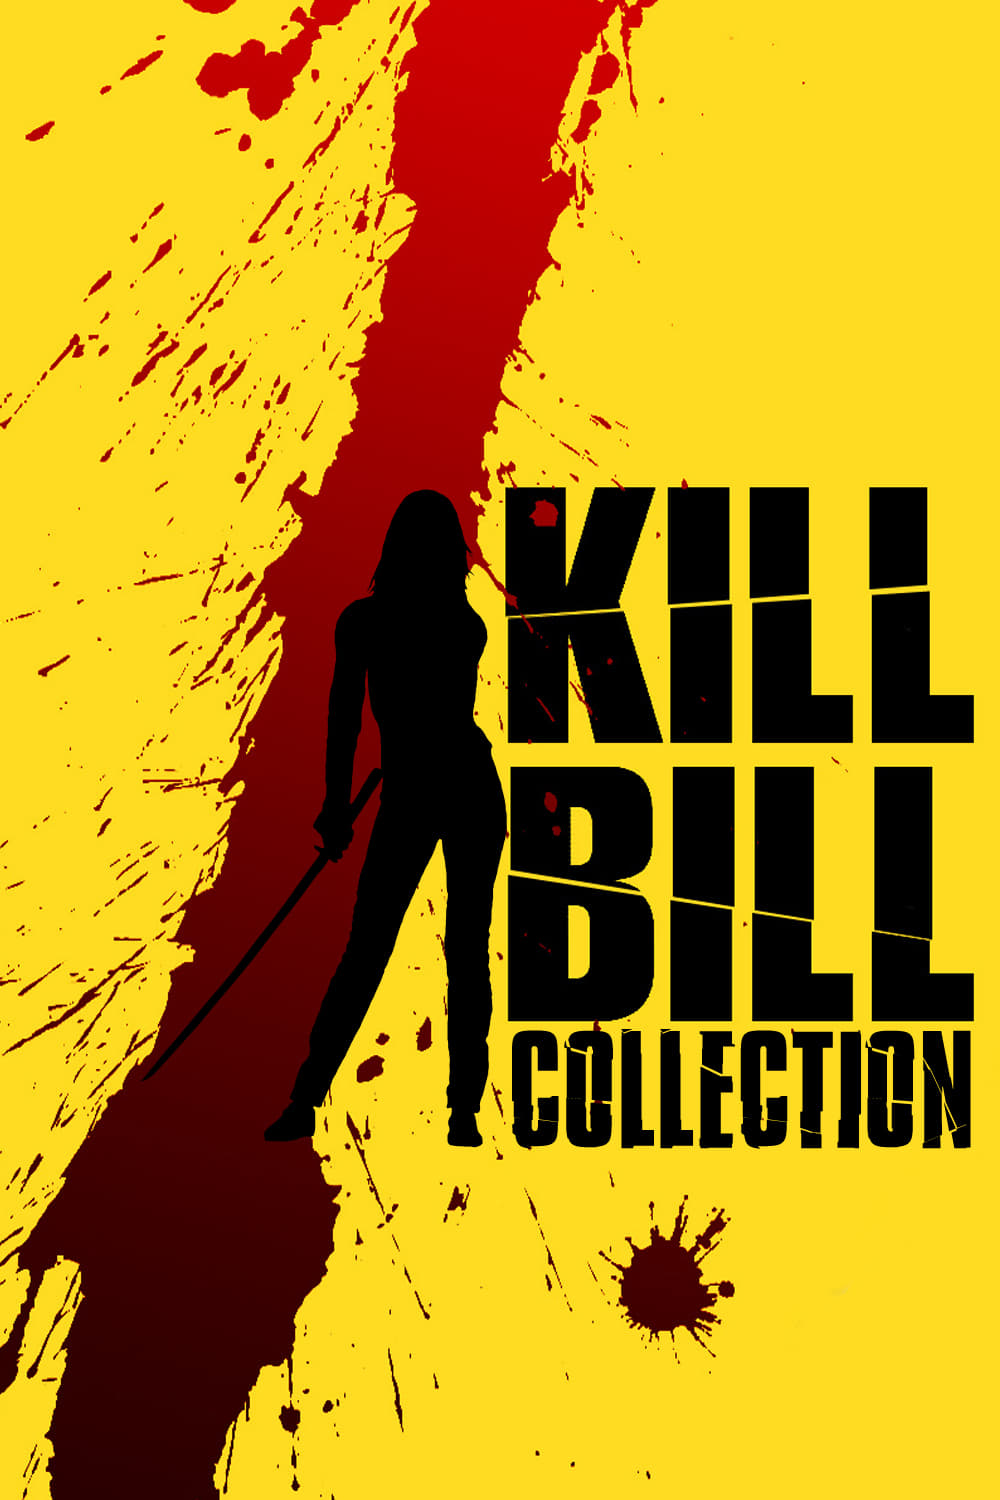 Kill Bill Collection | The Poster Database (TPDb)